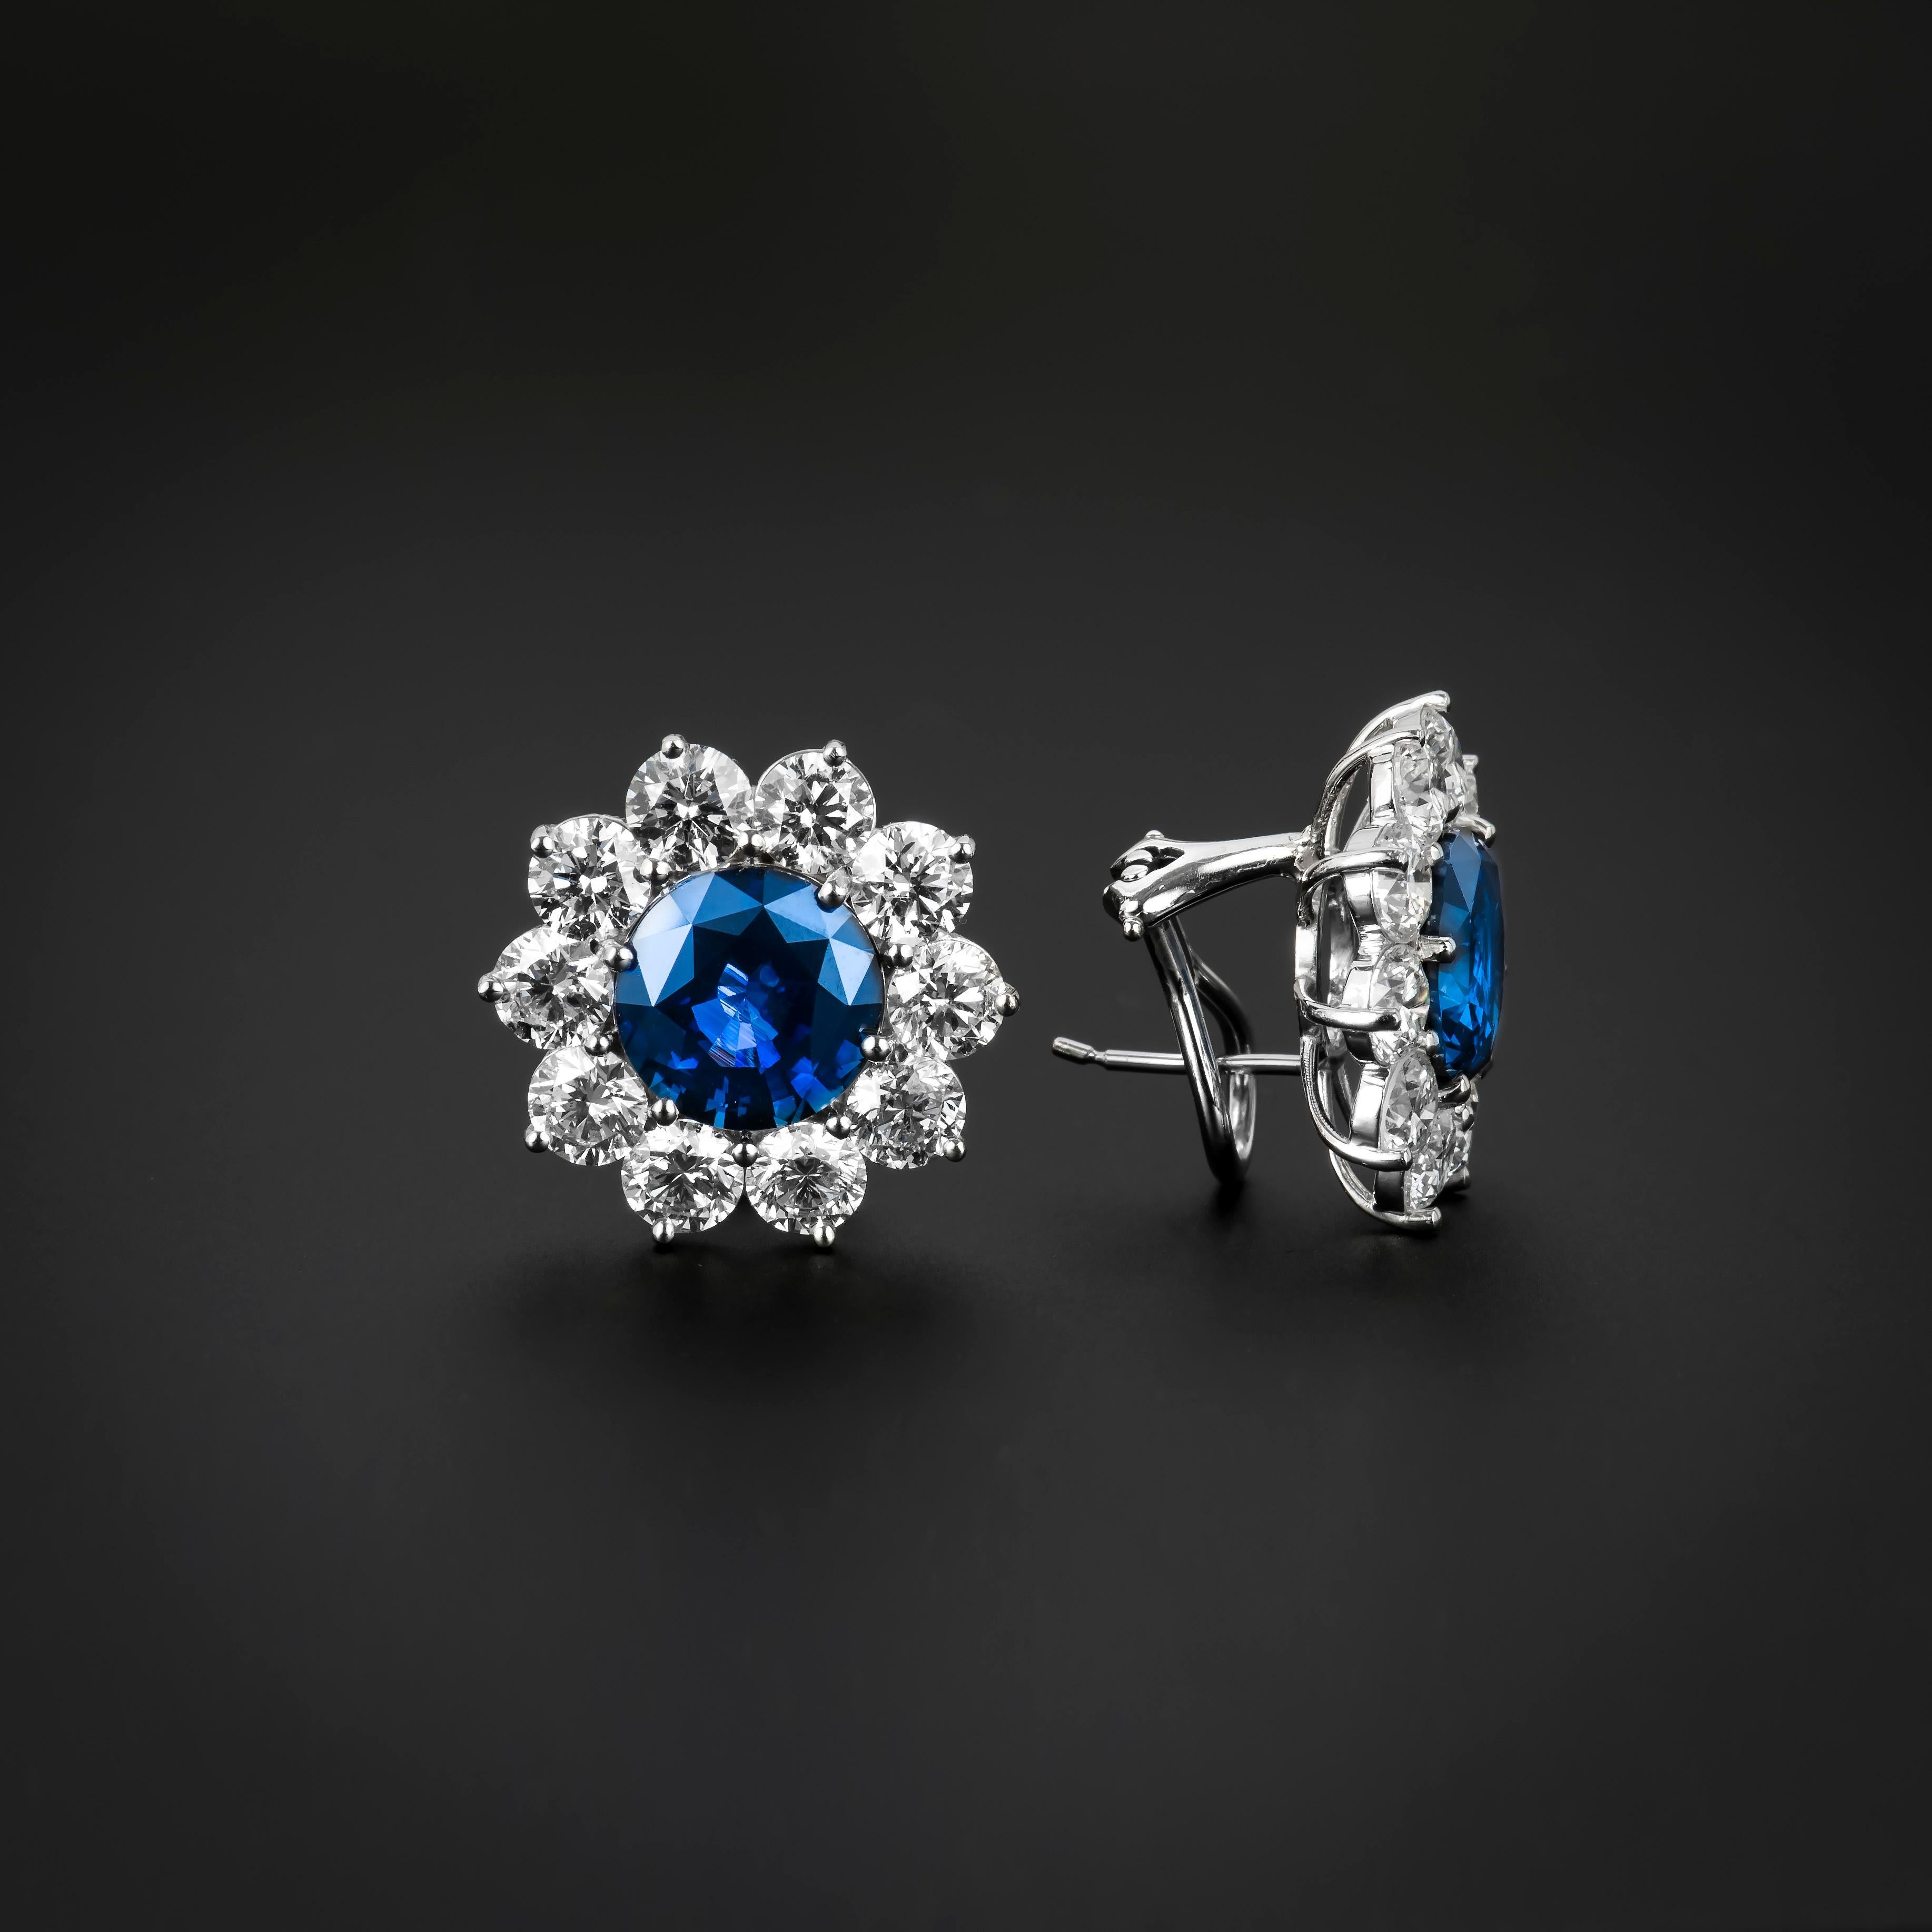 Round Cut 10.01 Carat Blue Sapphire Stud Earrings with 8.3 Carat Total Weight Diamonds